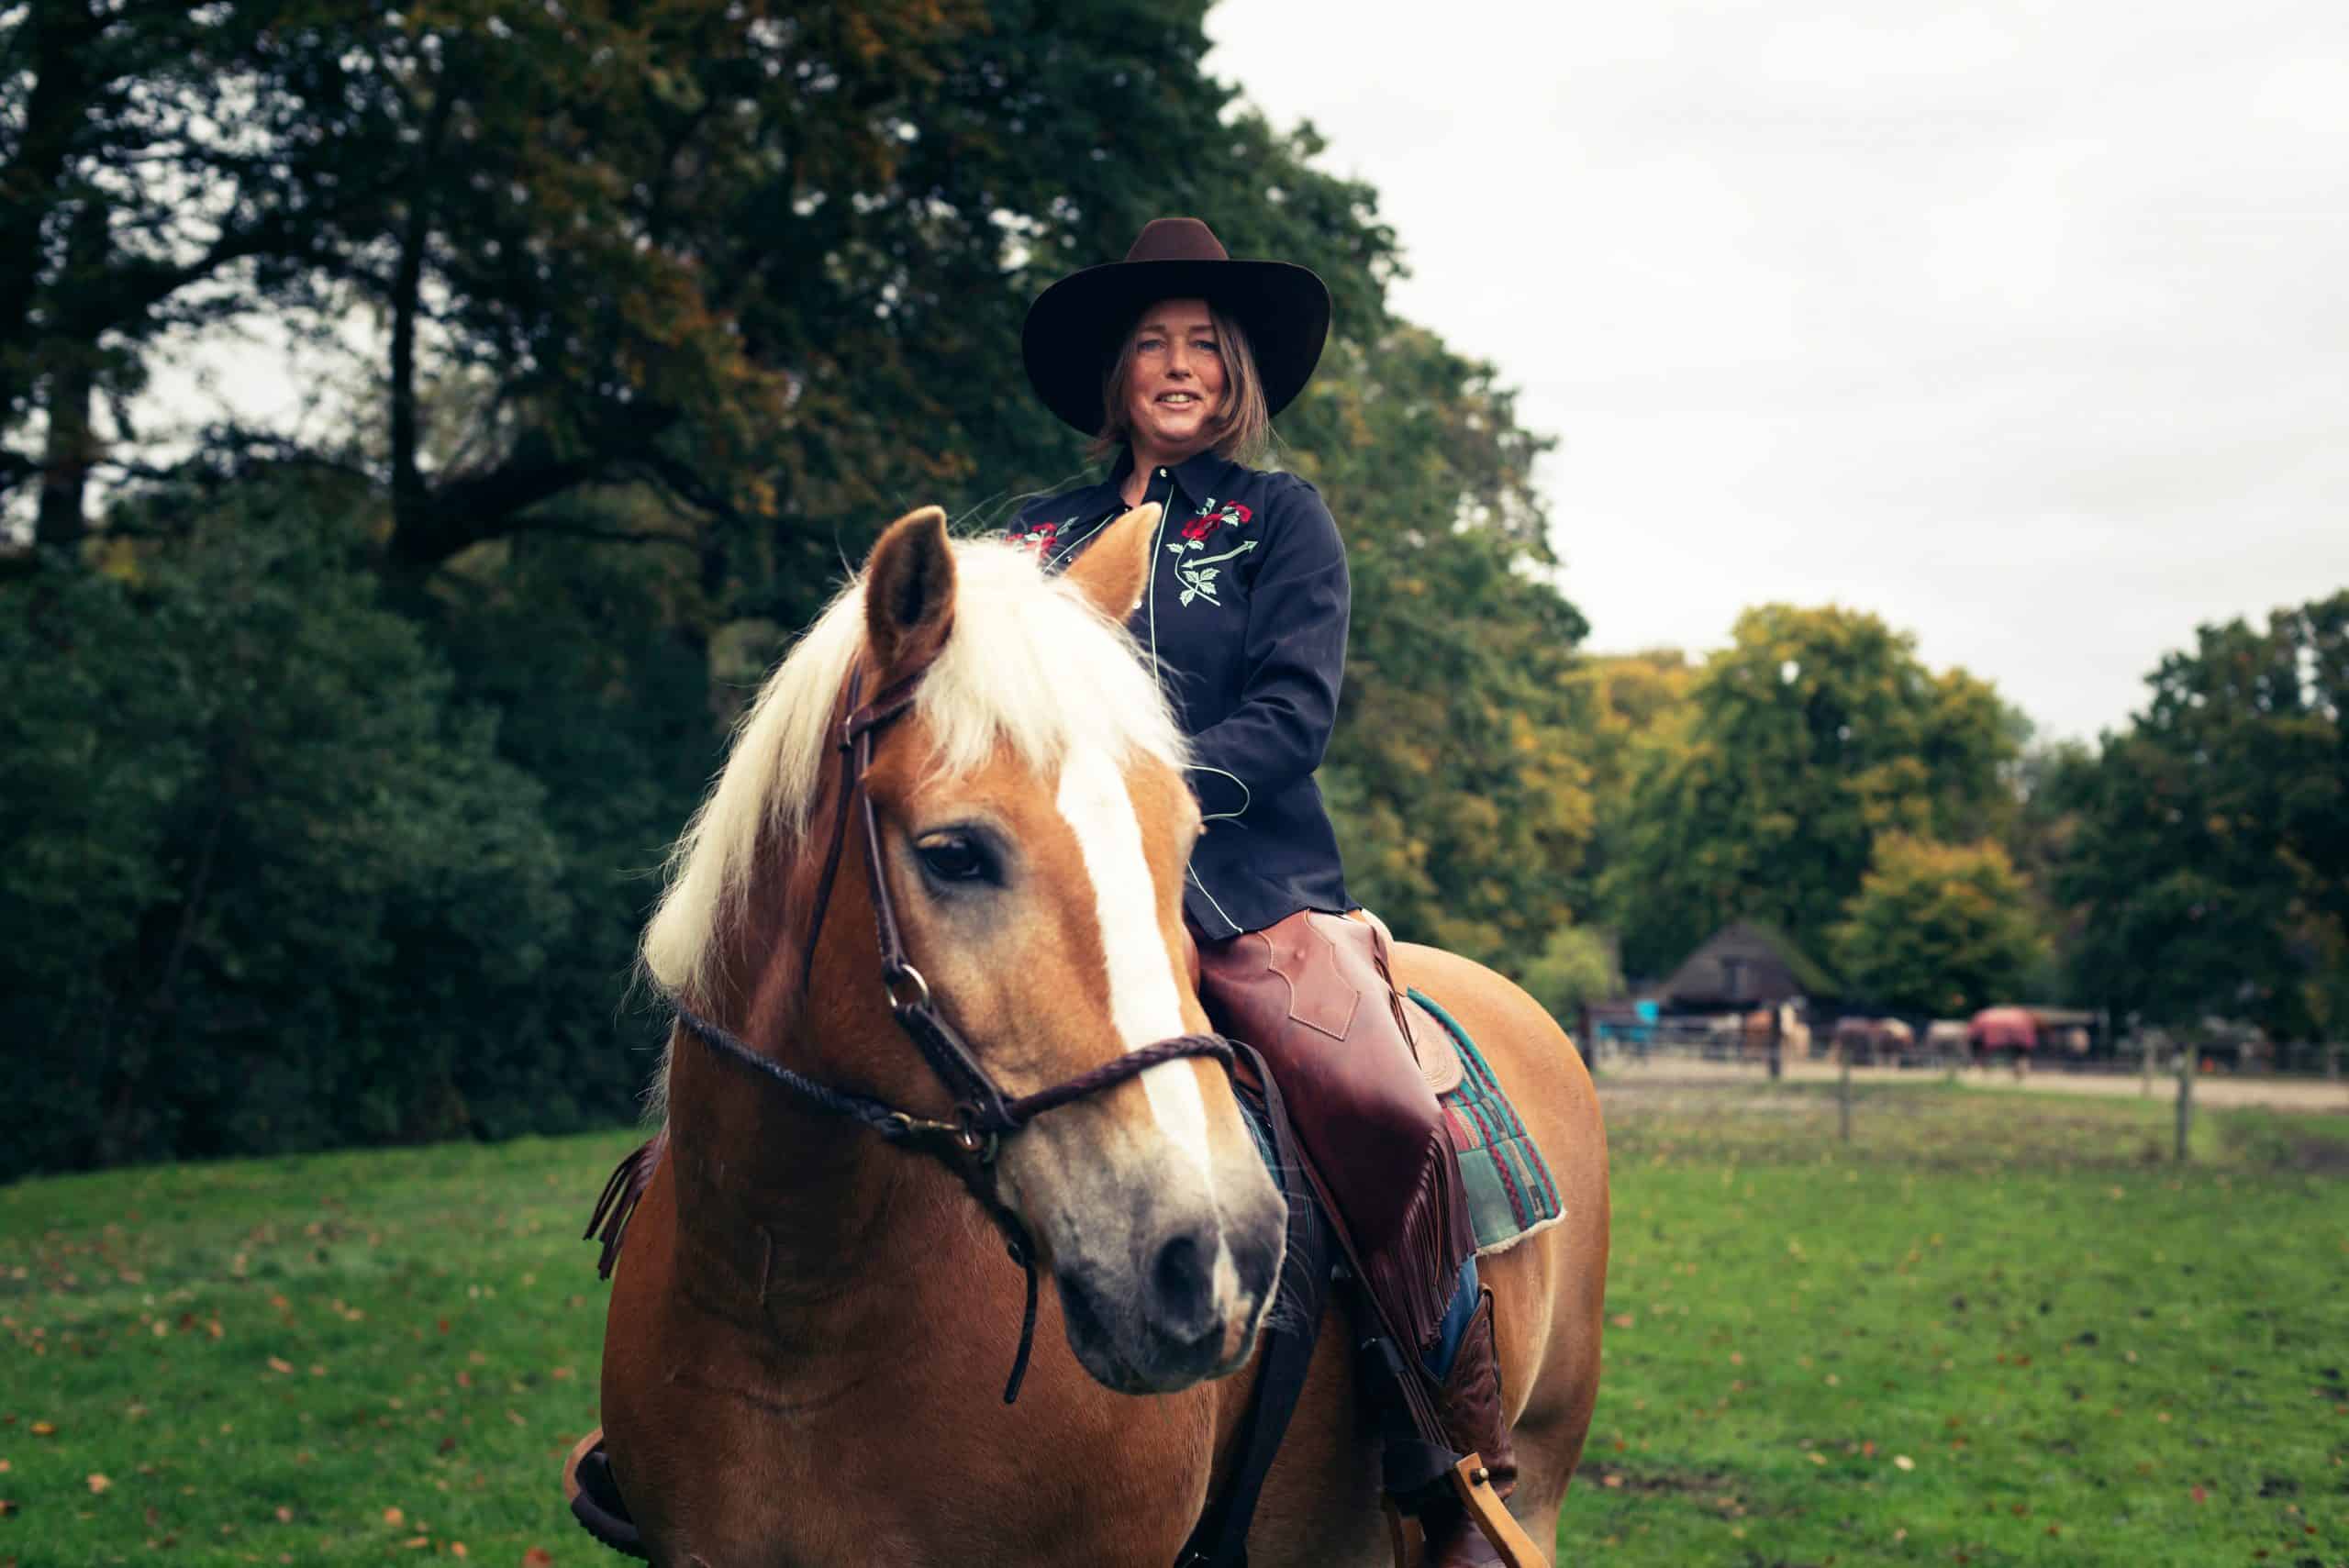 Smiling western style woman horse riding in countryside.